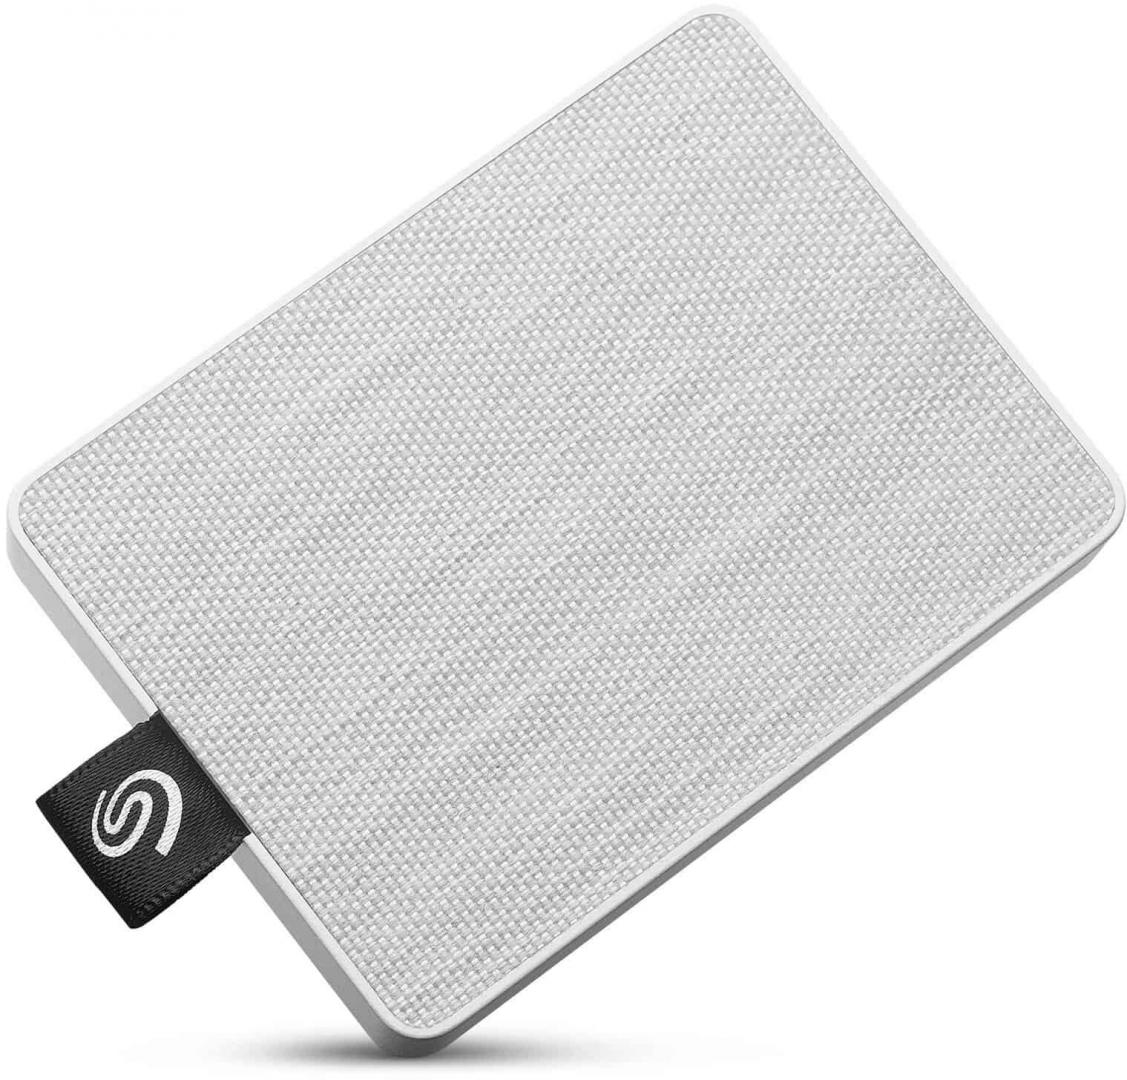 SSD Extern Seagate One Touch 1TB, alb, USB 3.0